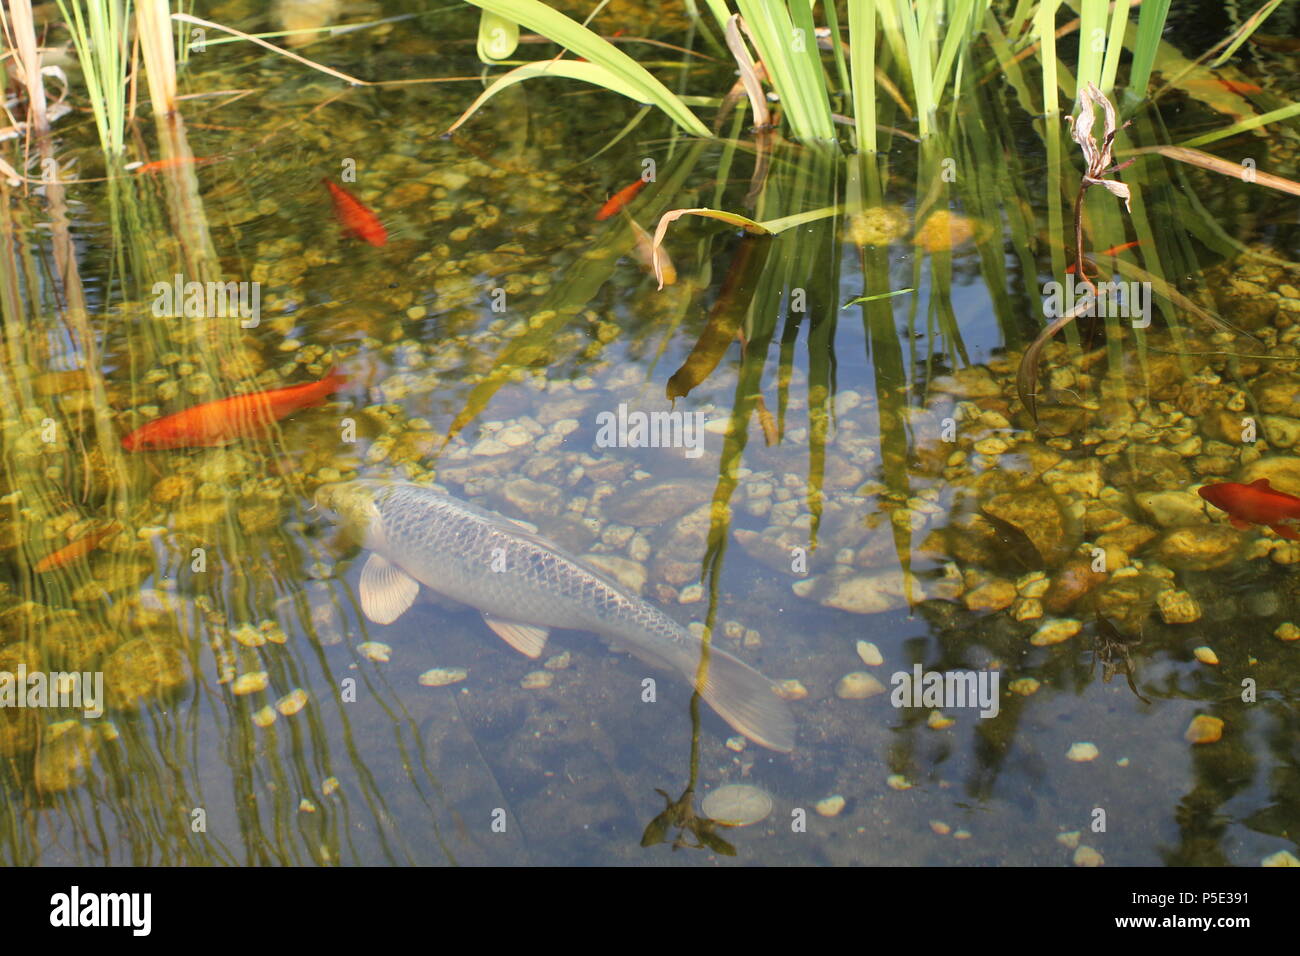 House artificial pond with gold fishes and water plants. Garden pool. Stock Photo